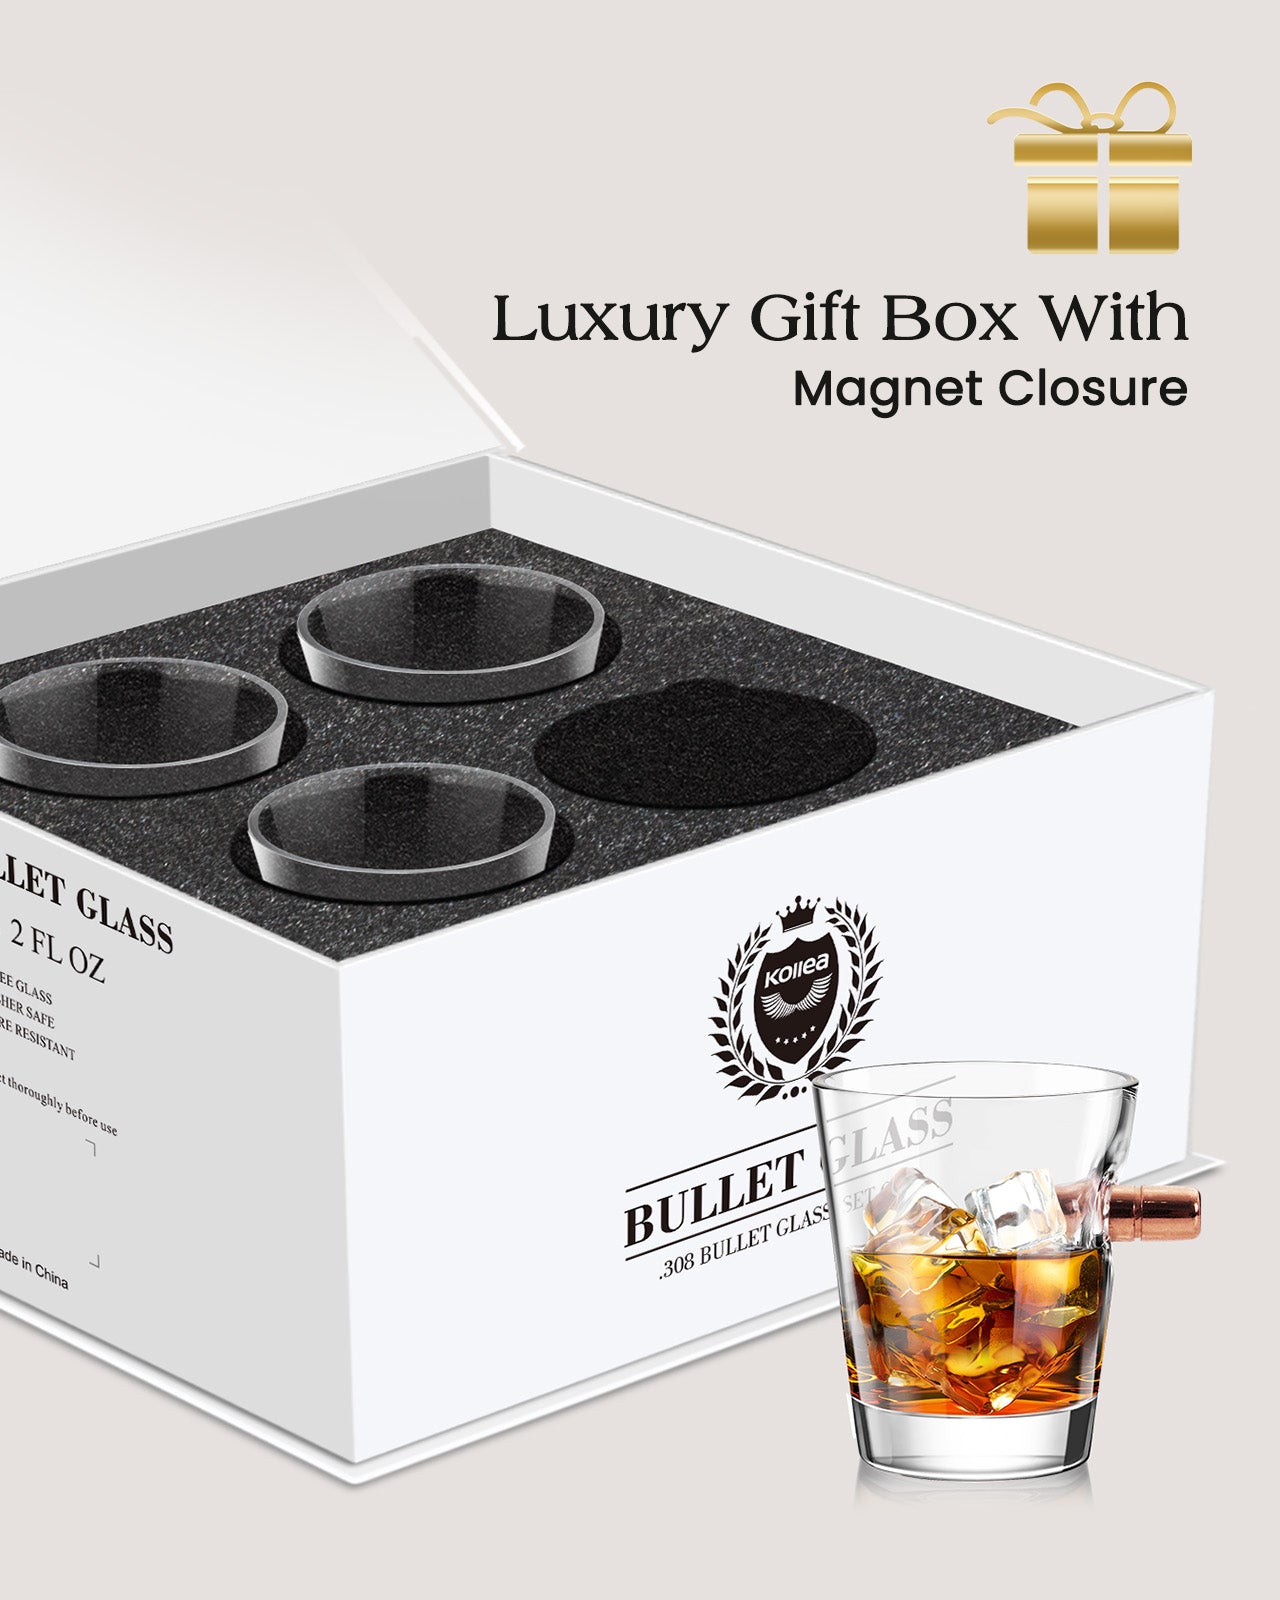 Bullet Shaped Whiskey Stones Gift Set For Men With Vintage Wooden Case,  Metal Stainless Steel Ice Cubes - 6 Pack, Cool Gadgets For Men Dad  Boyfriend